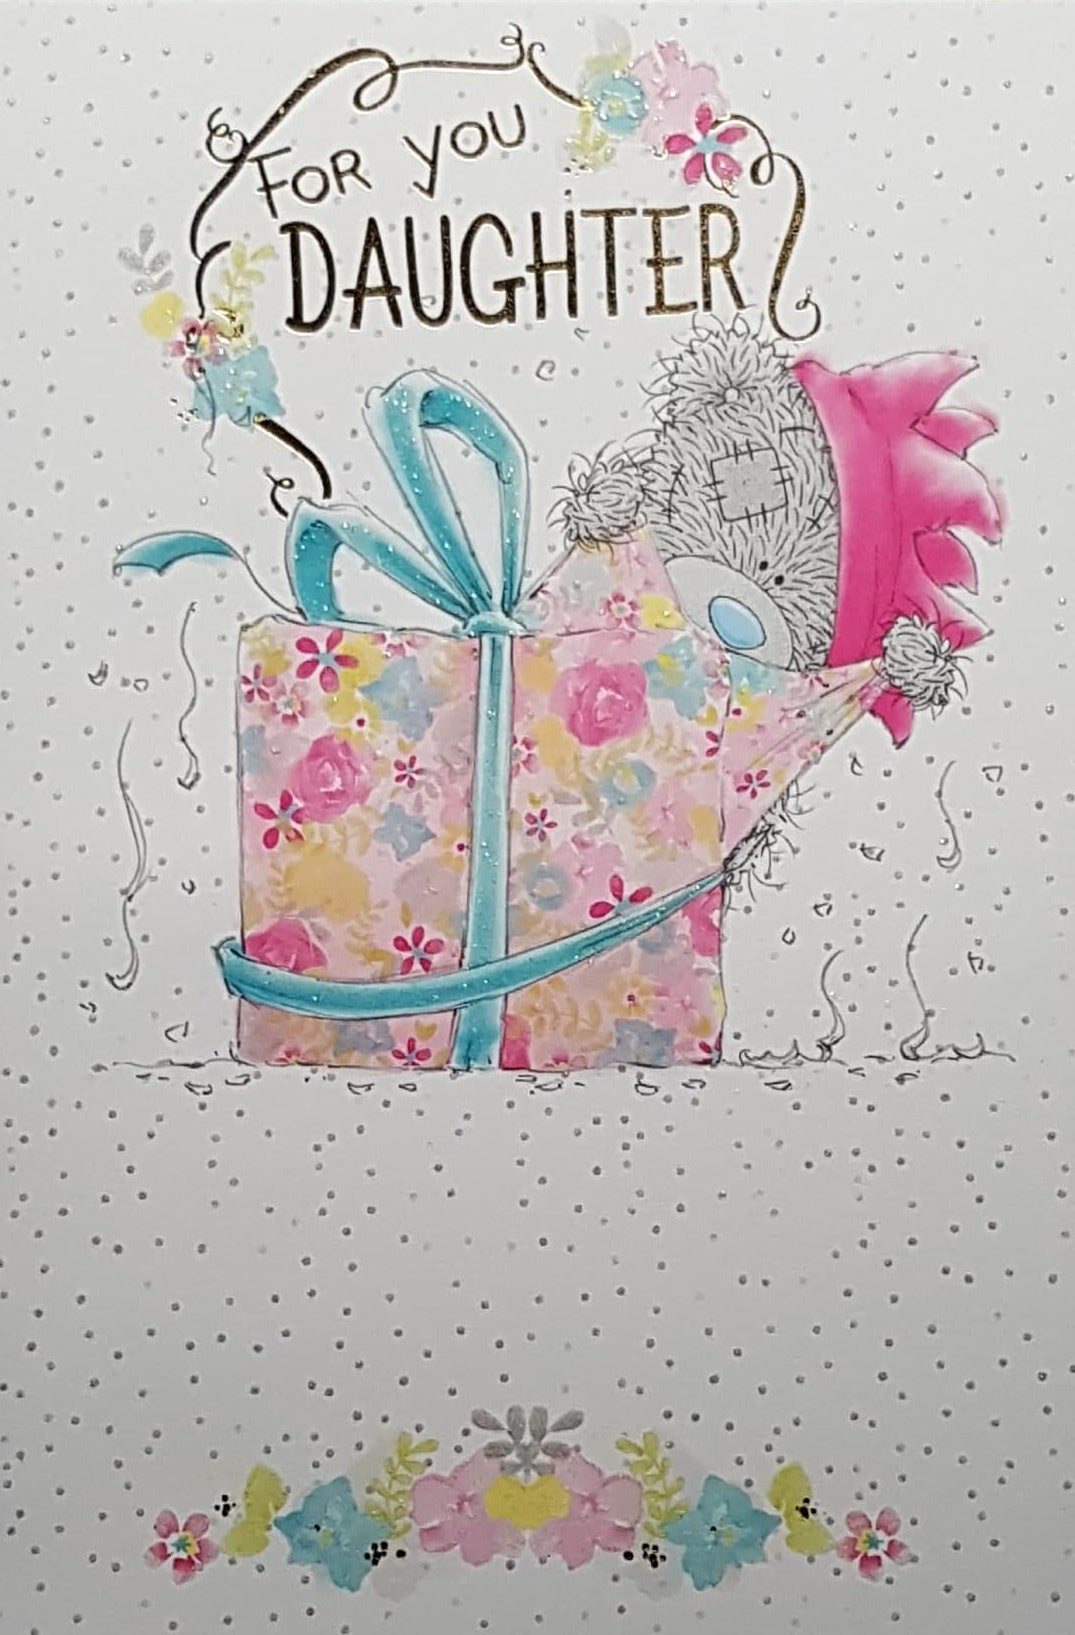 Birthday Card - Daughter / Teddy Unwrapping A Gift Box With A Blue Bow